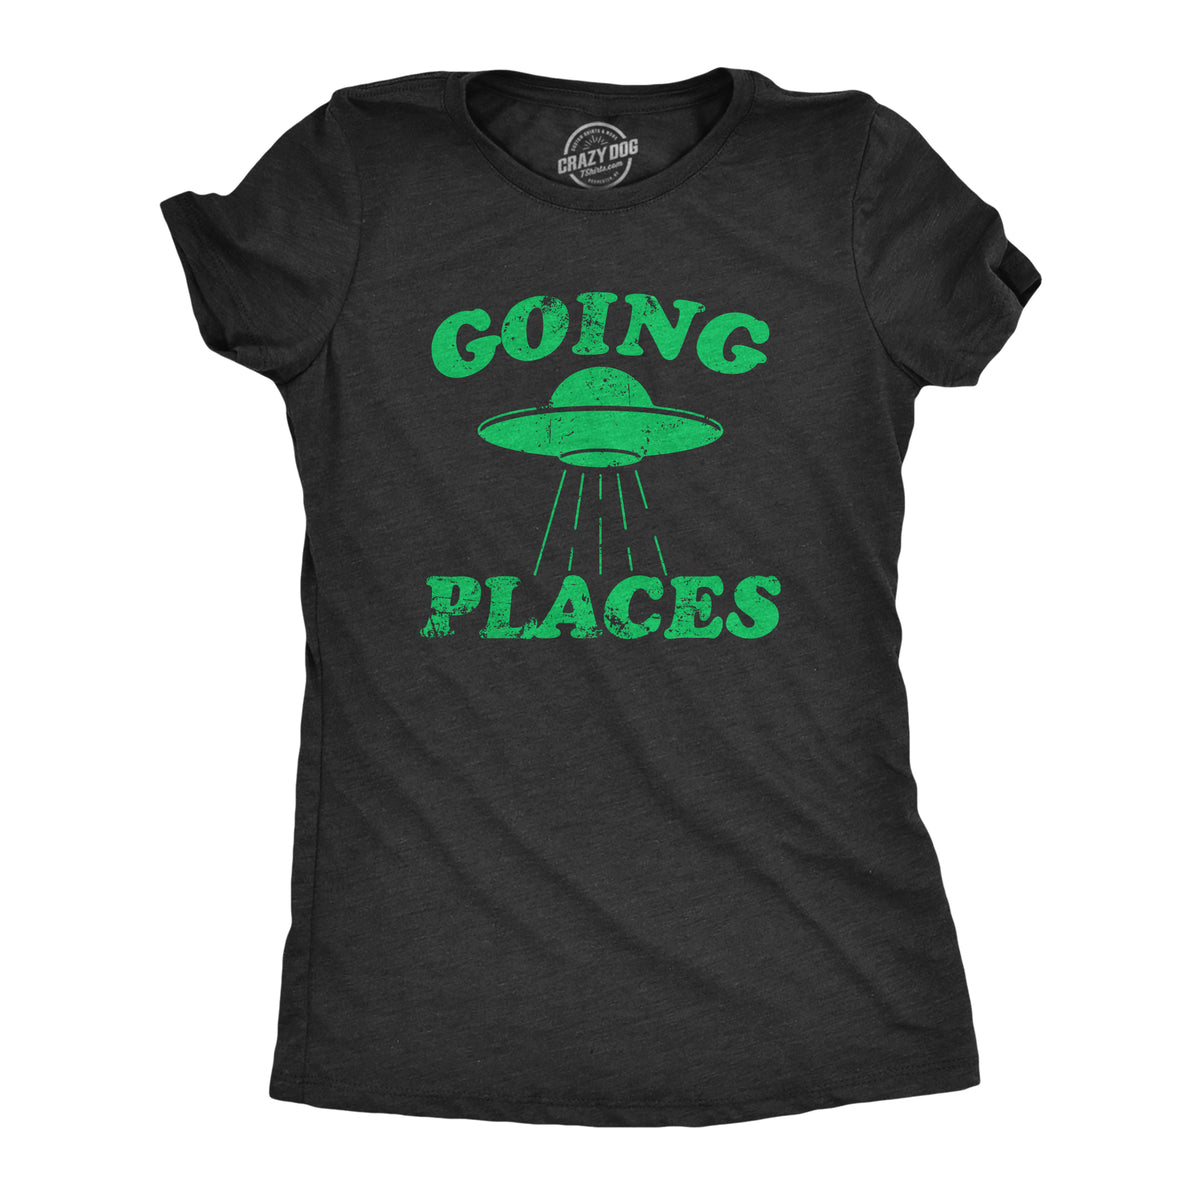 Funny Heather Black - PLACES Going Places Womens T Shirt Nerdy sarcastic Tee